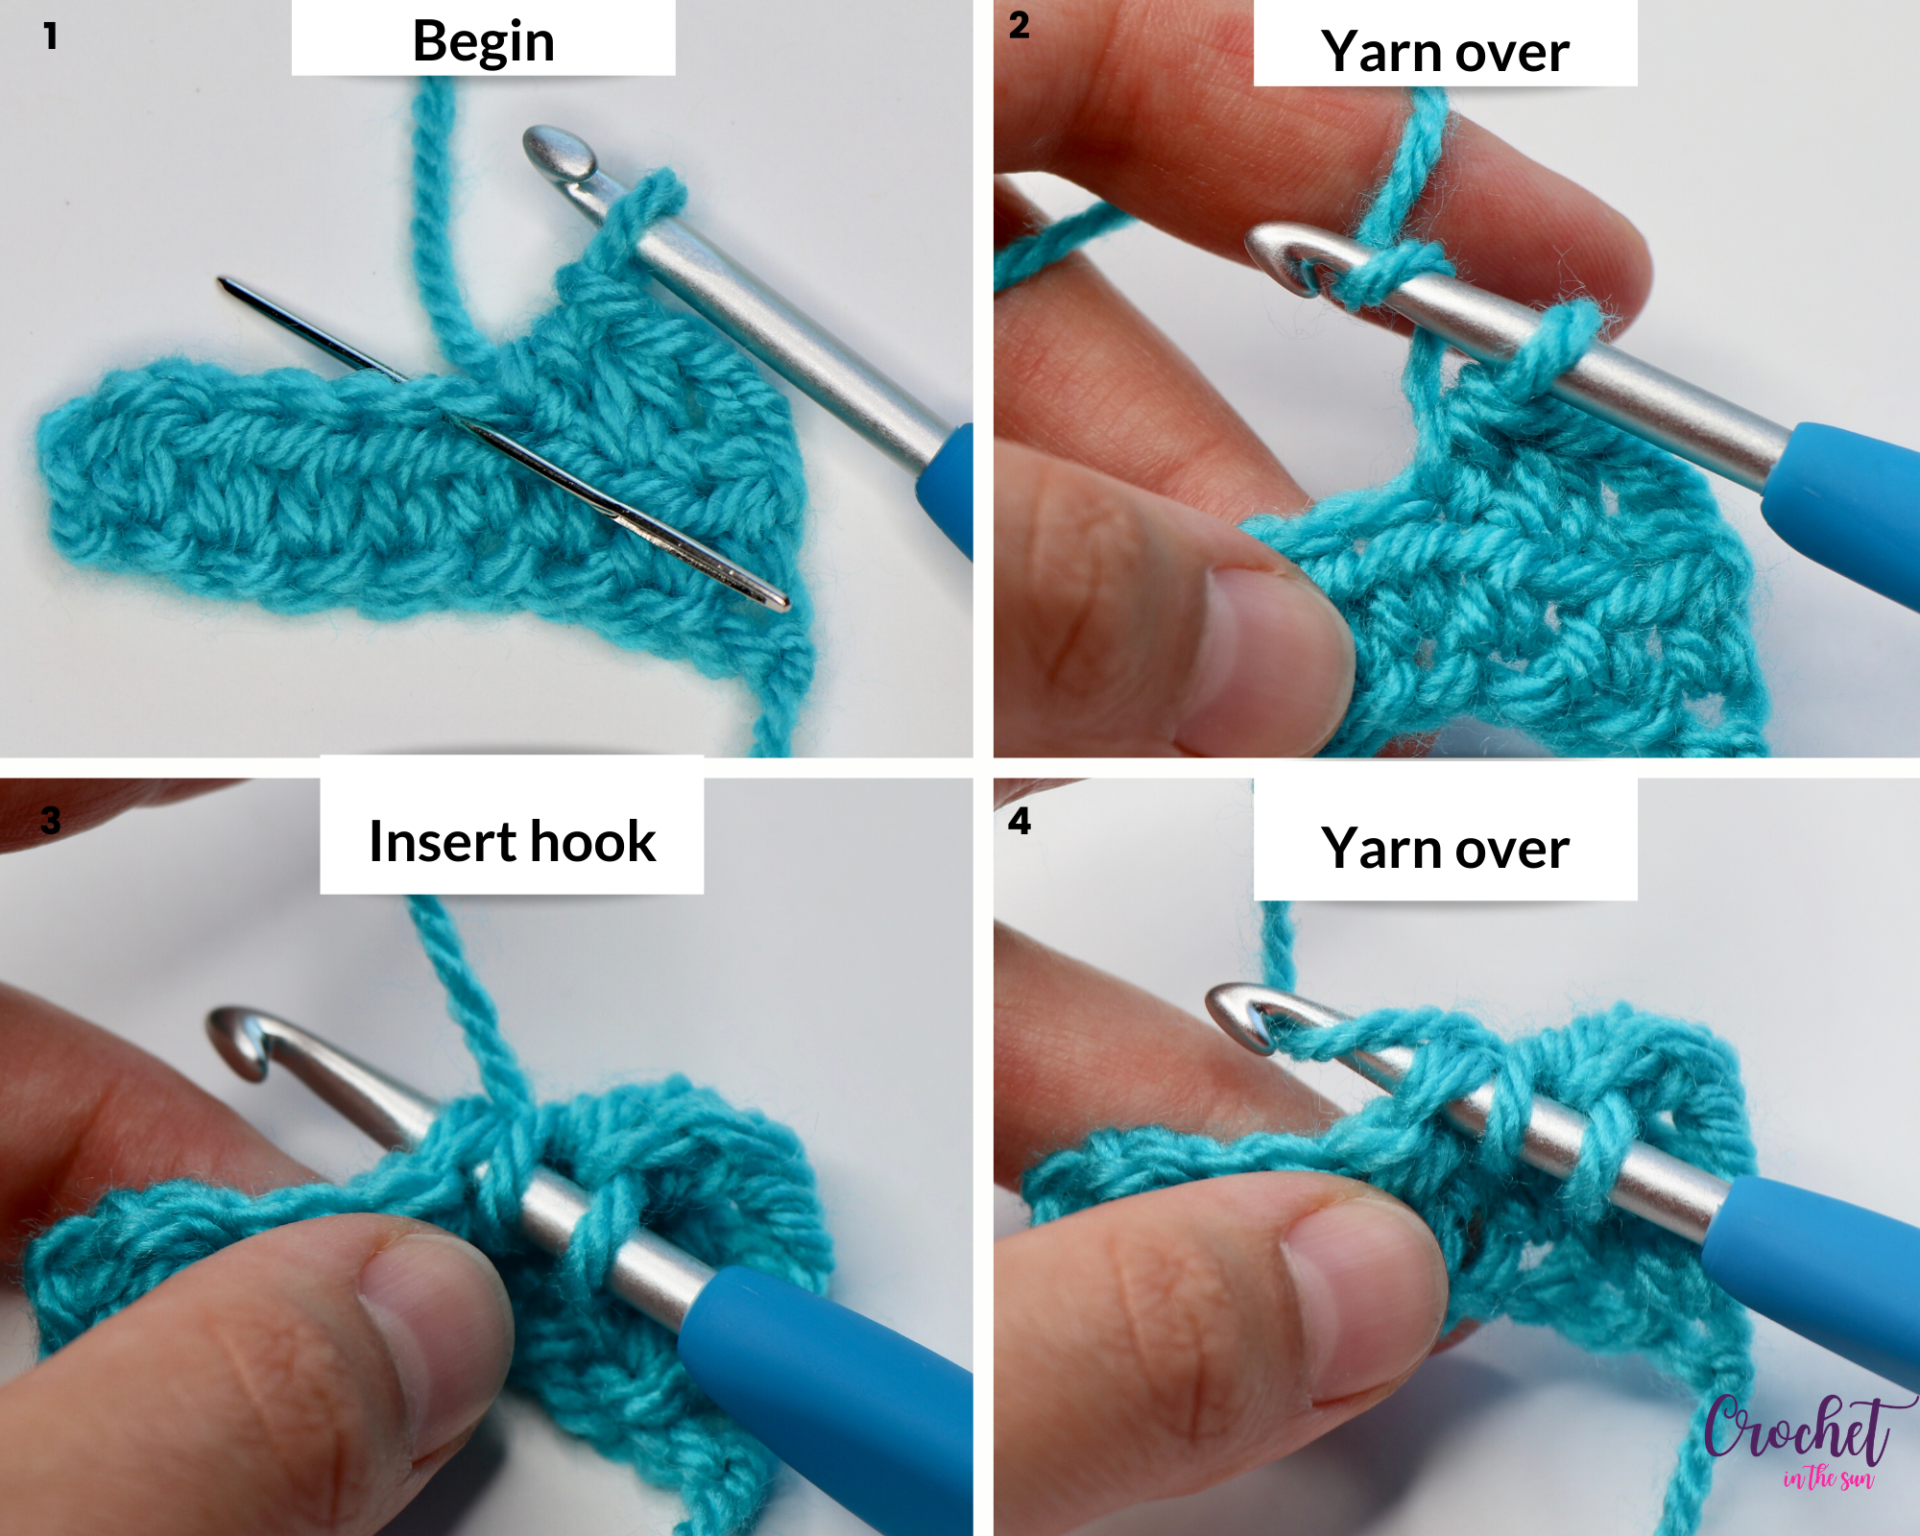 Crochet Backpack, Step by Step, Tutorial - PART 1 